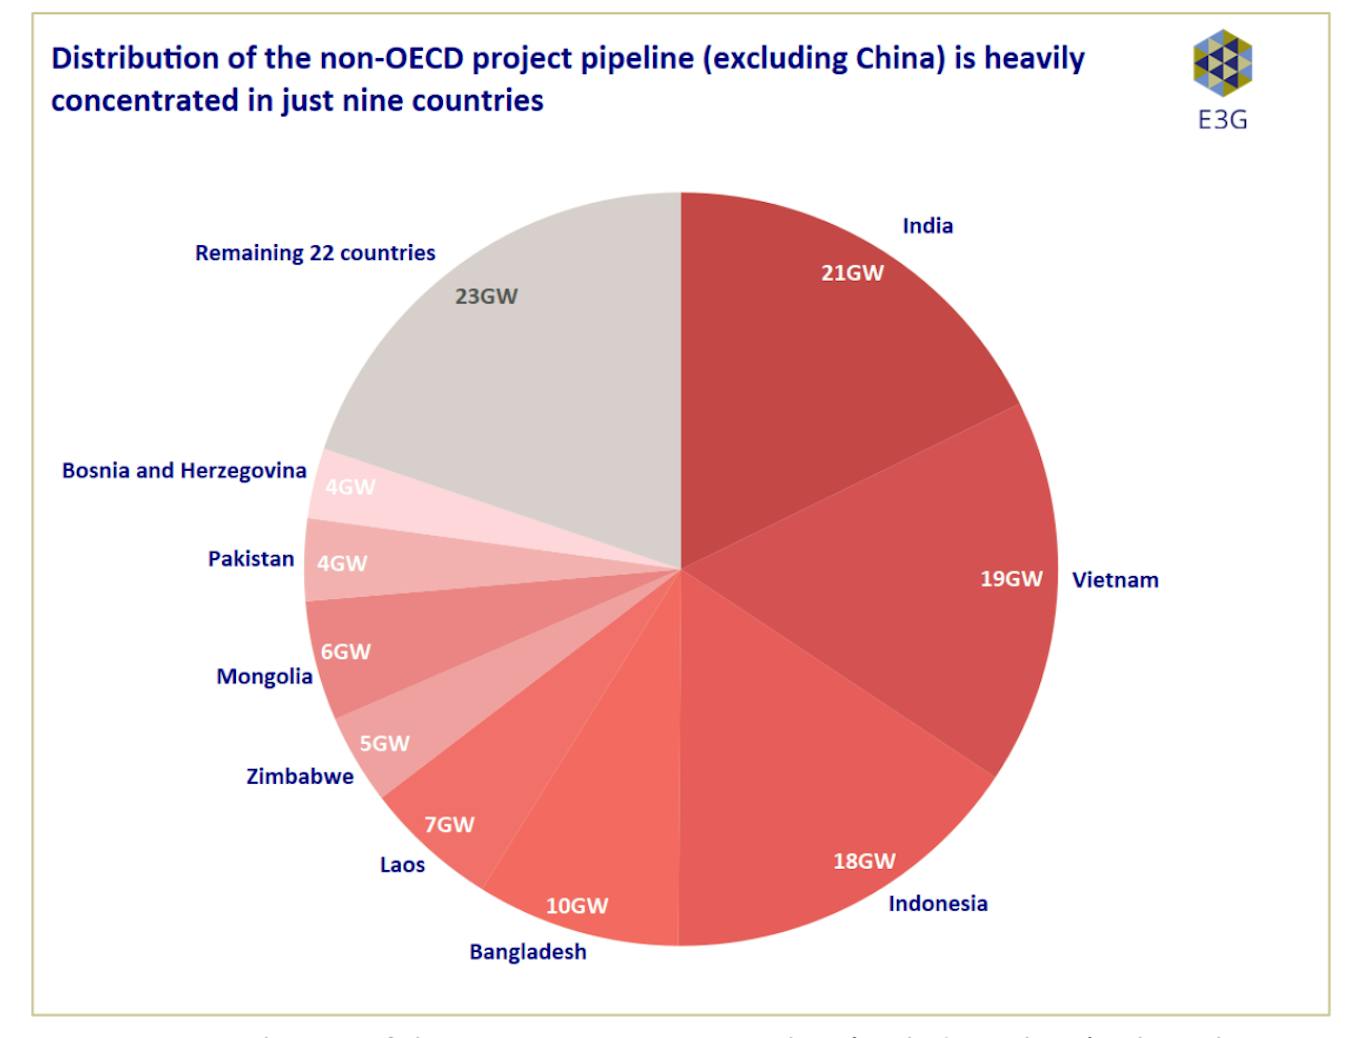 Distribution of the non-OECD project pipeline (excluding China) is heavily concentrated in just nine countries.